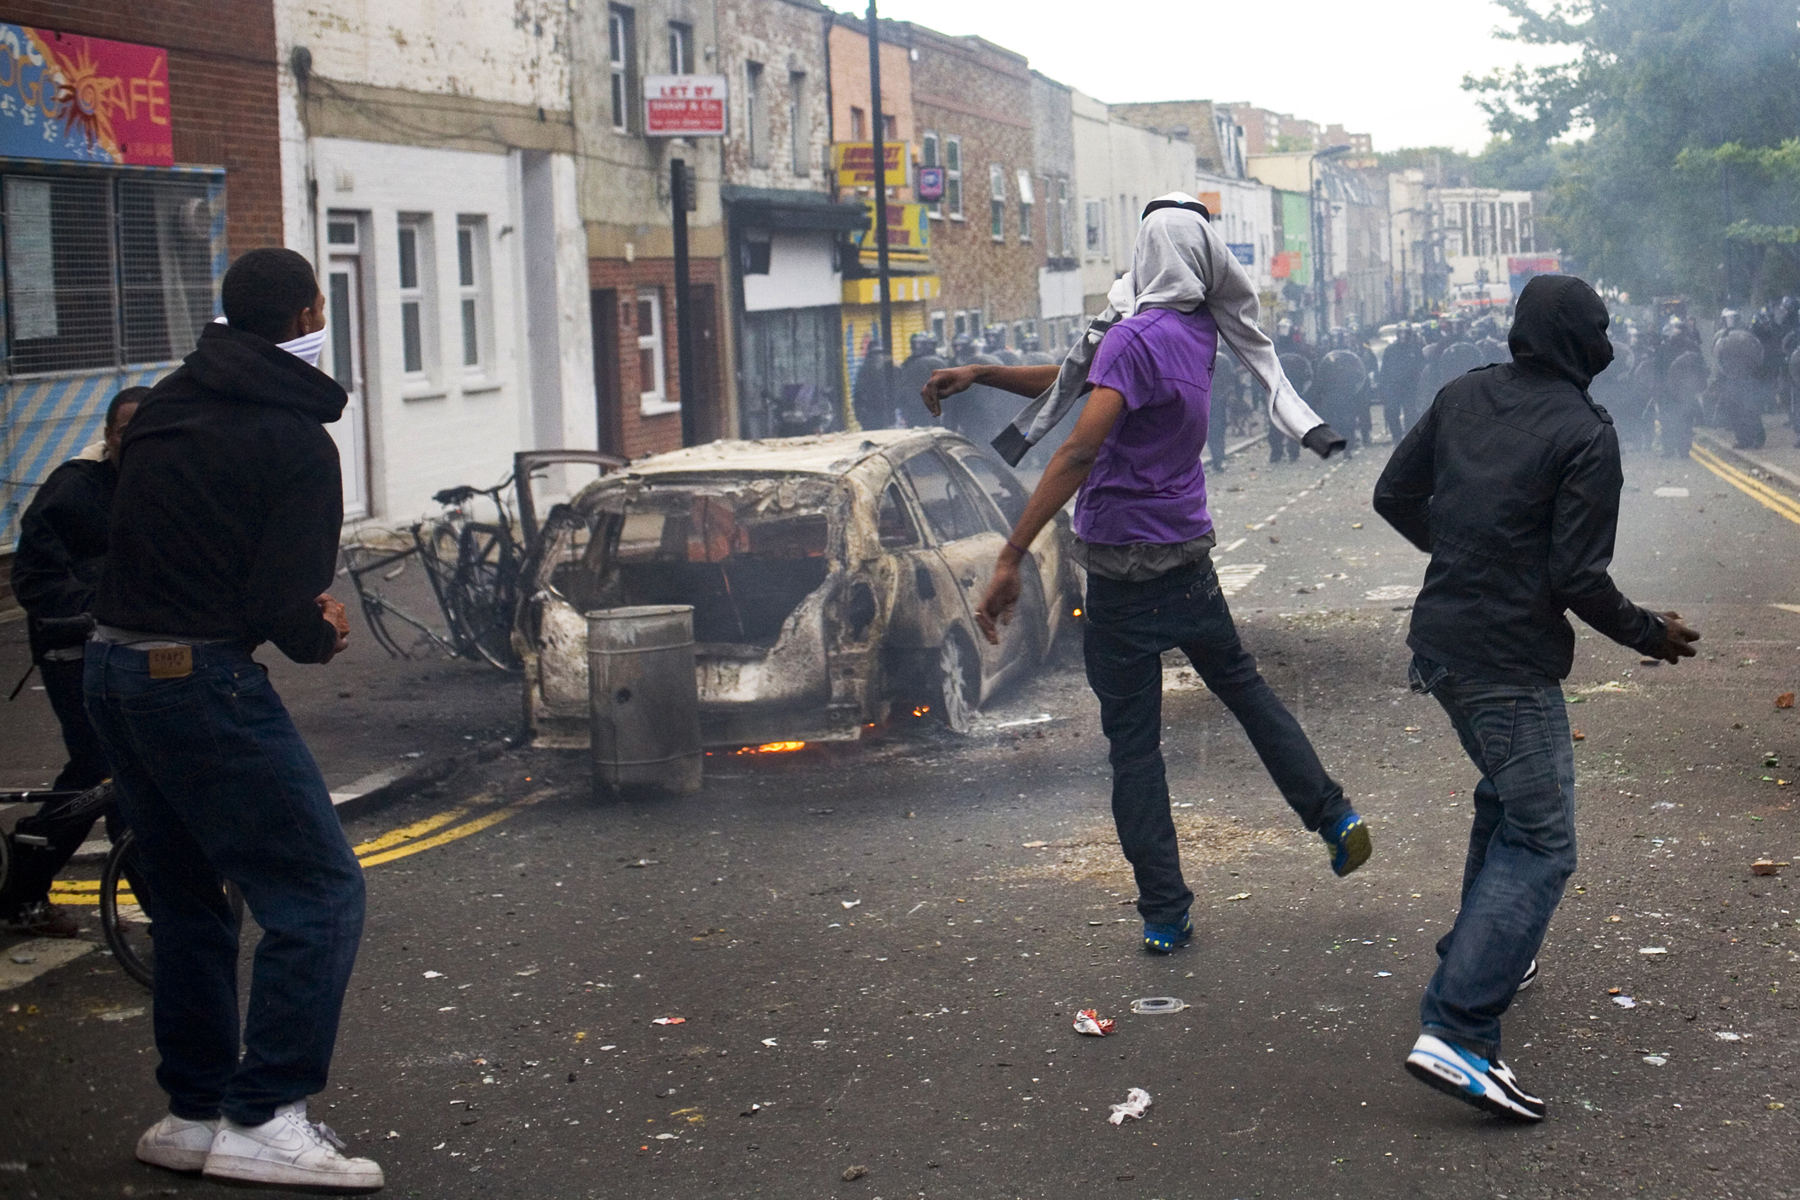 Rioters throw bricks and bottles at the police on Clarence Road in the Hackney area of London.